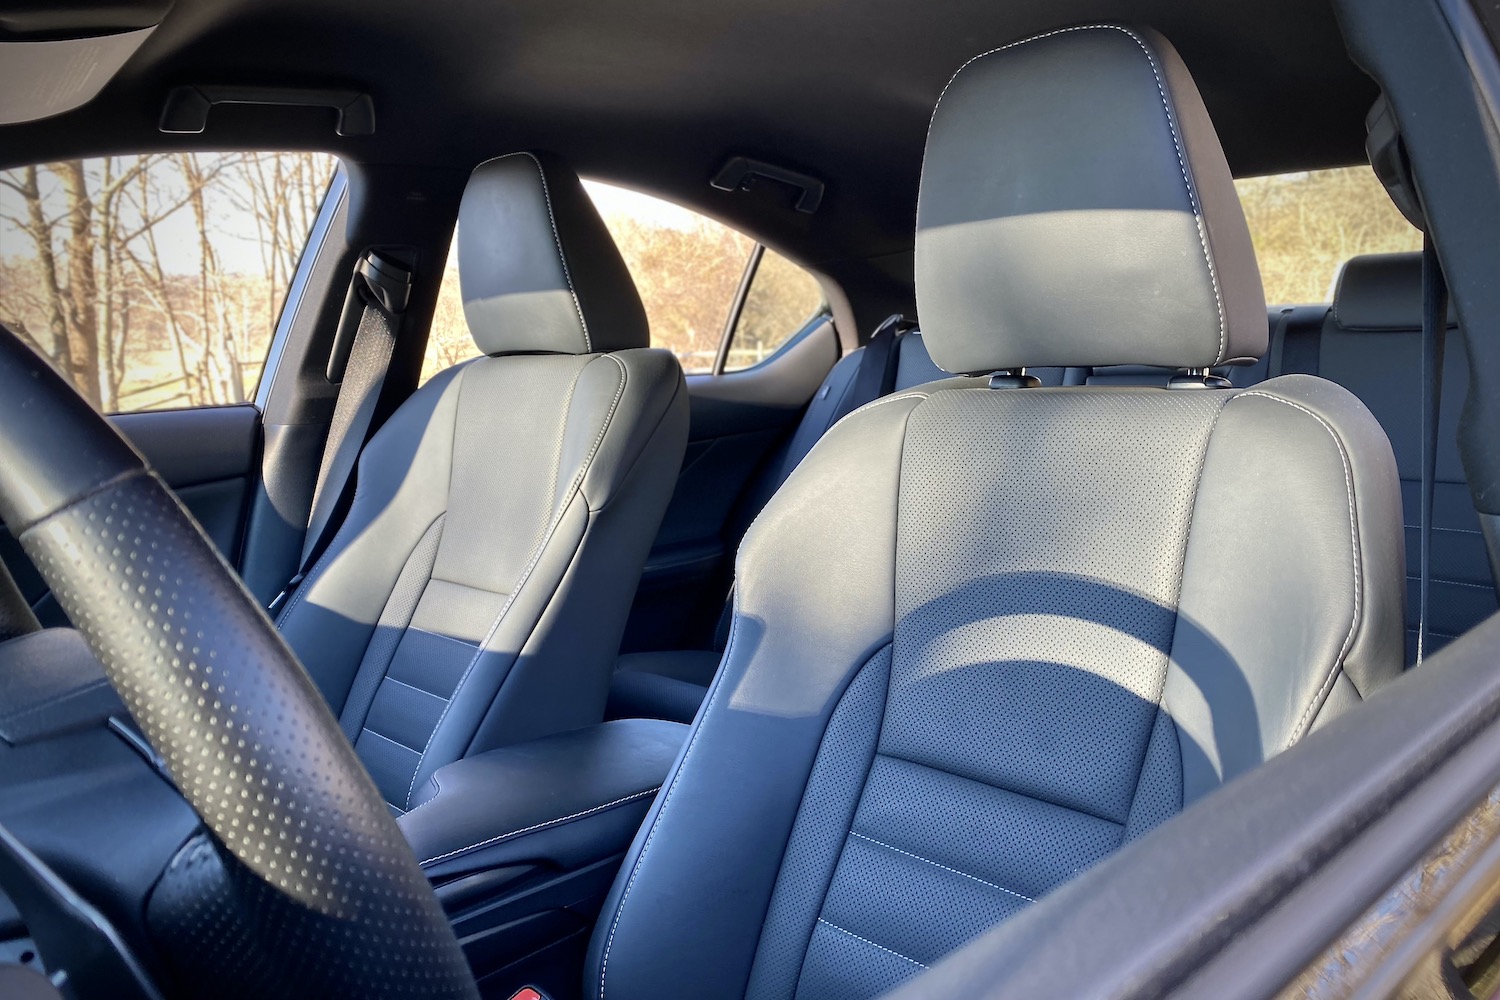 Lexus IS 500 front seats from driver's side.